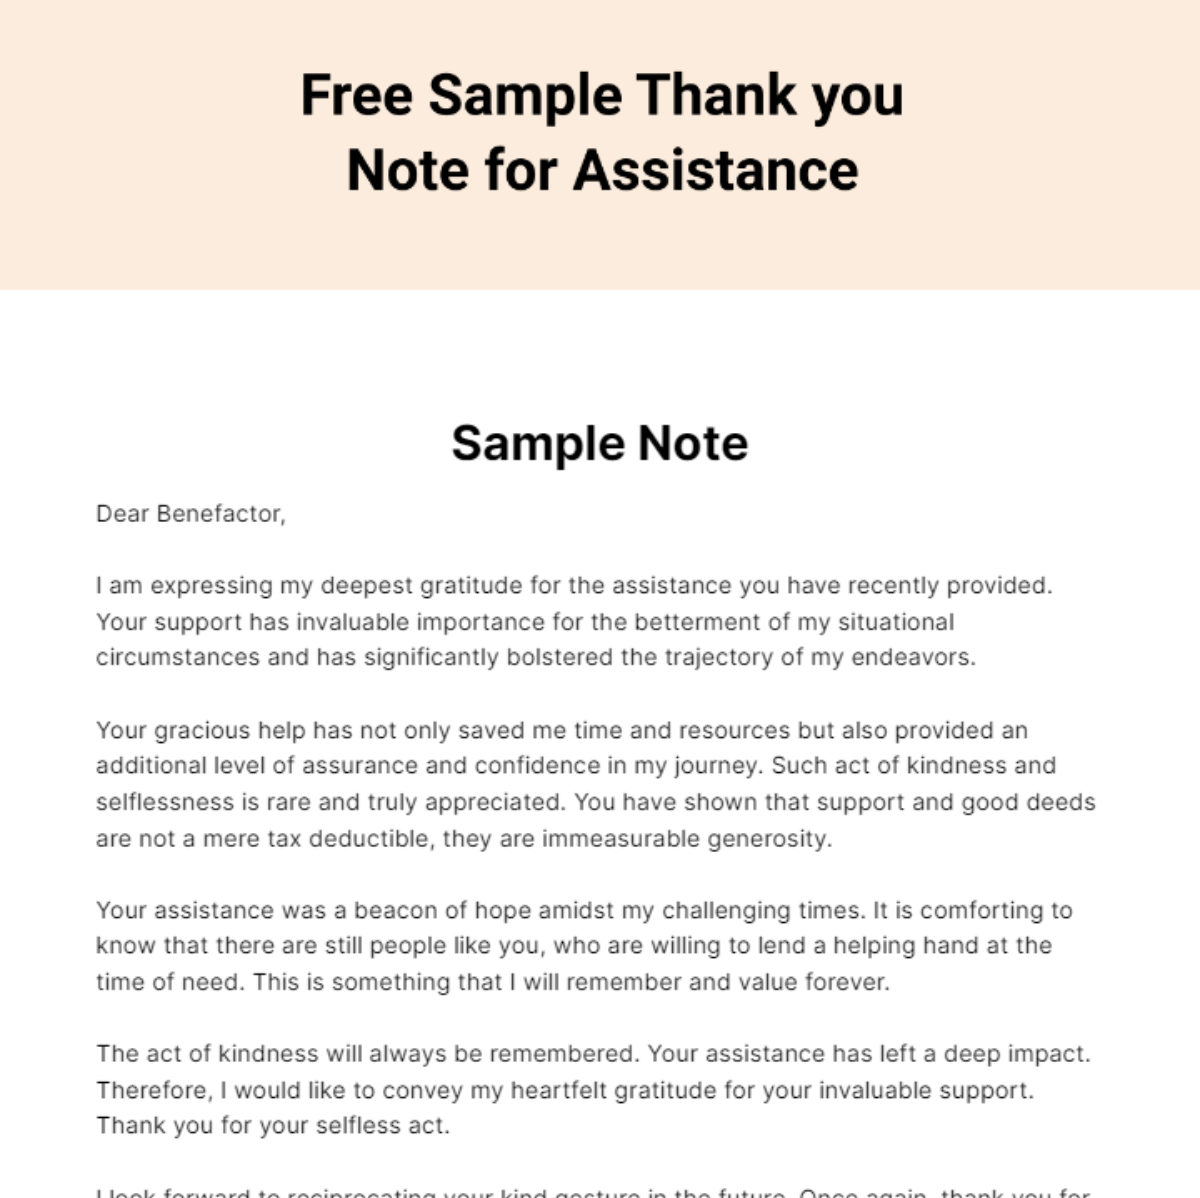 Free Sample Thank you Note for Assistance Template